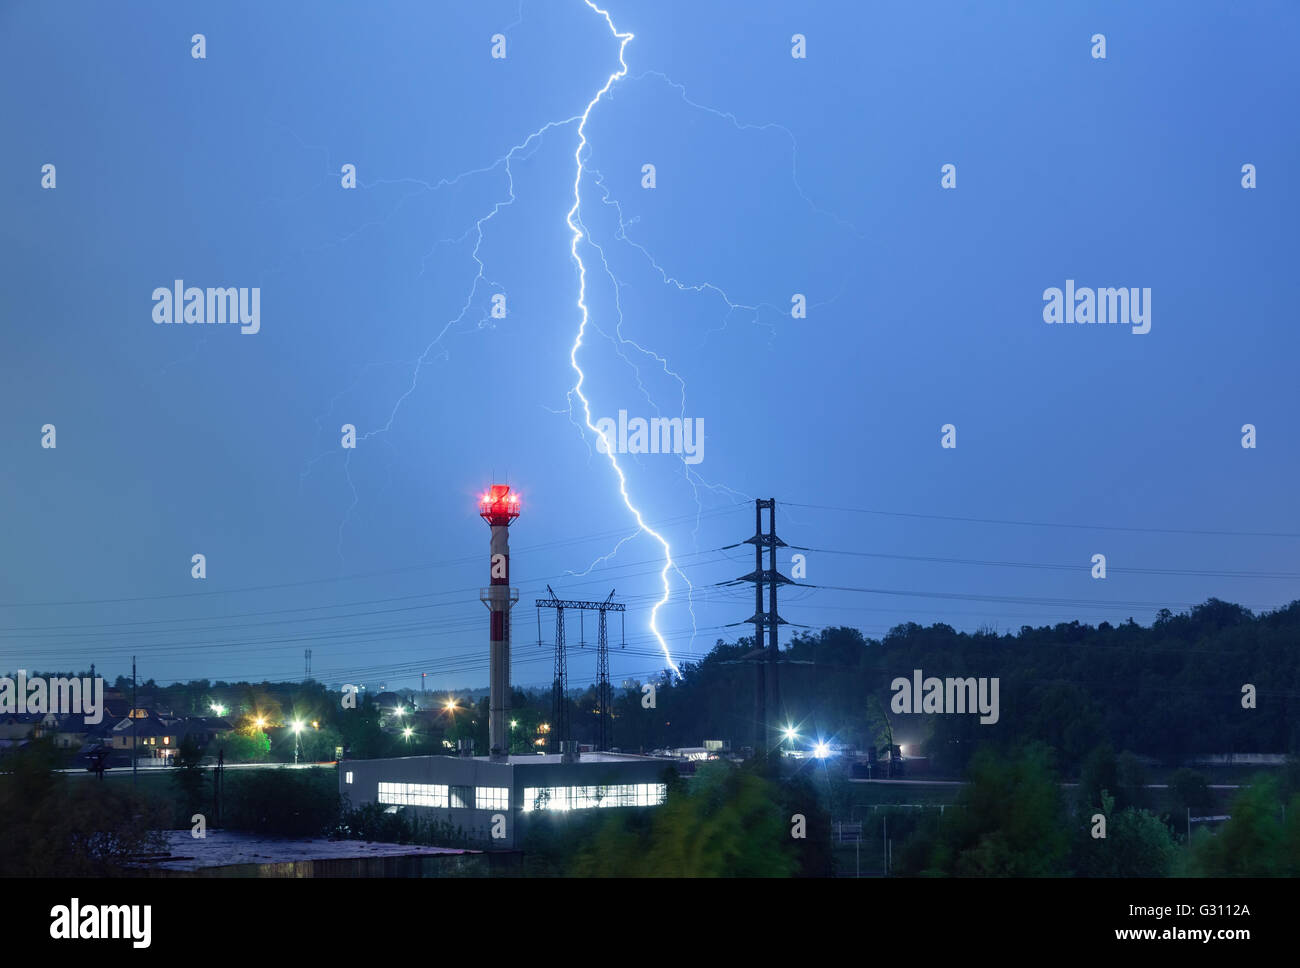 Lightning in the night sky over the boiler house and power lines Stock Photo